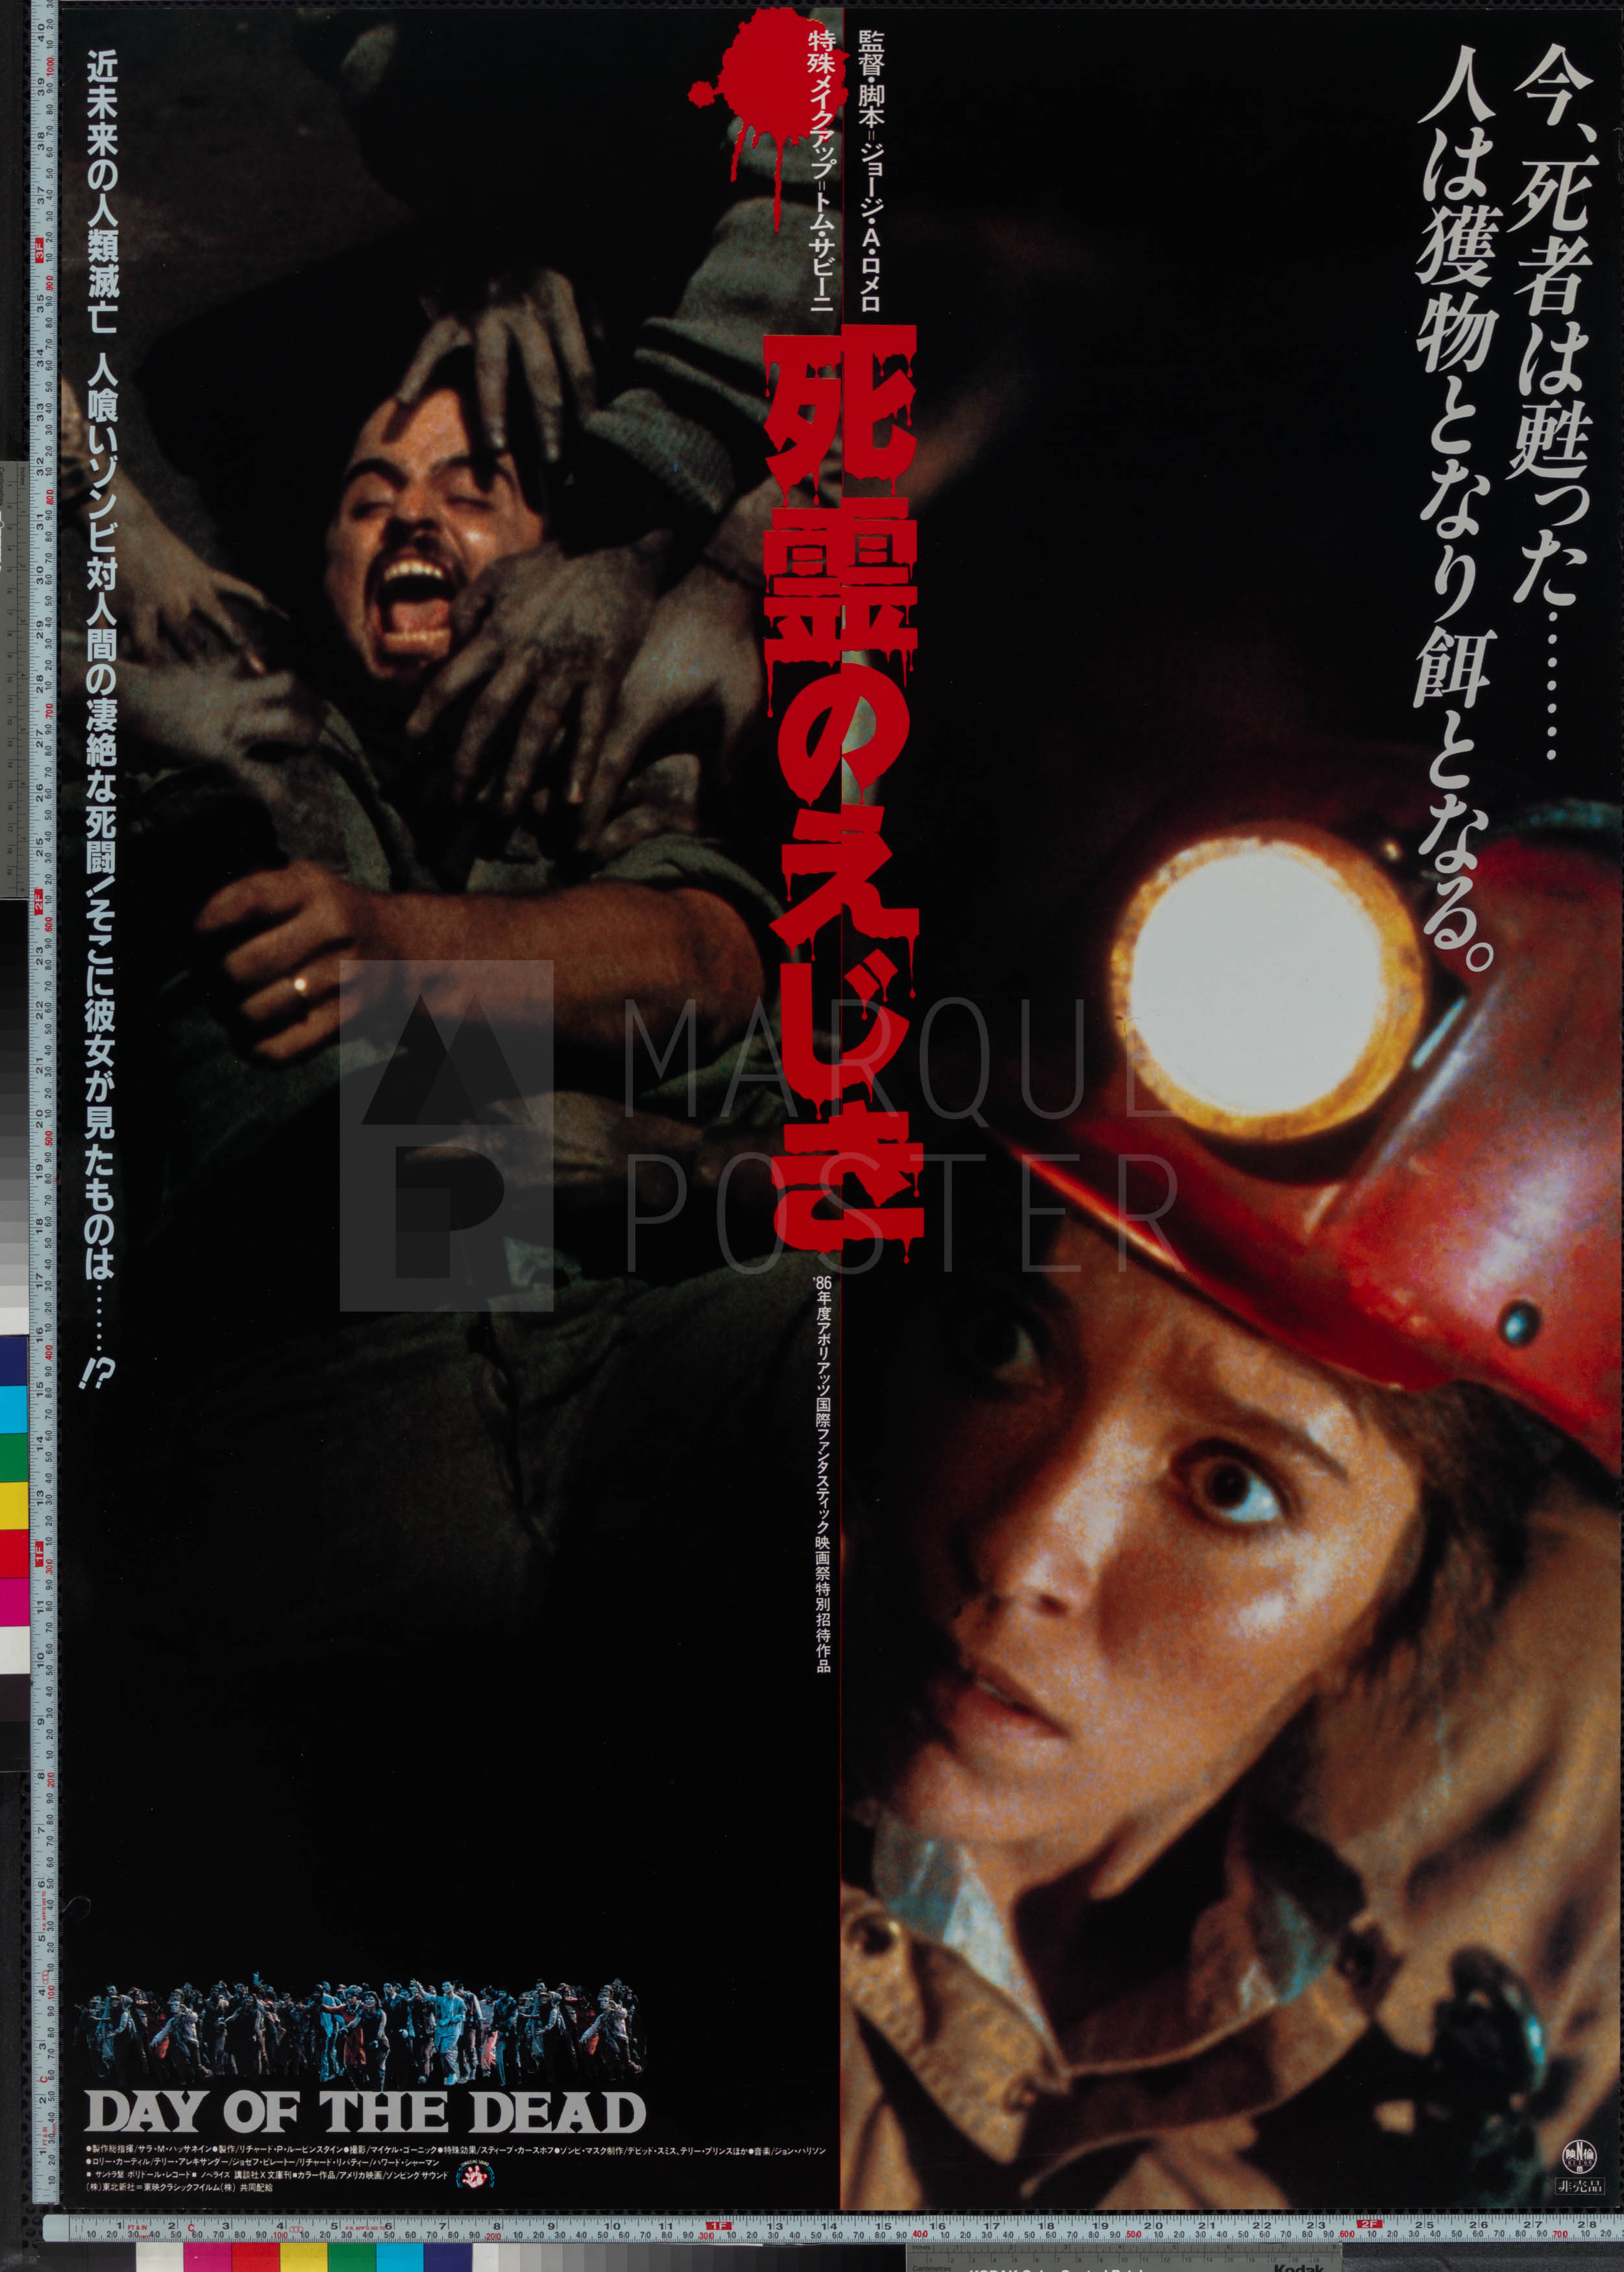 18-day-of-the-dead-helmet-style-japanese-b1-1985-02